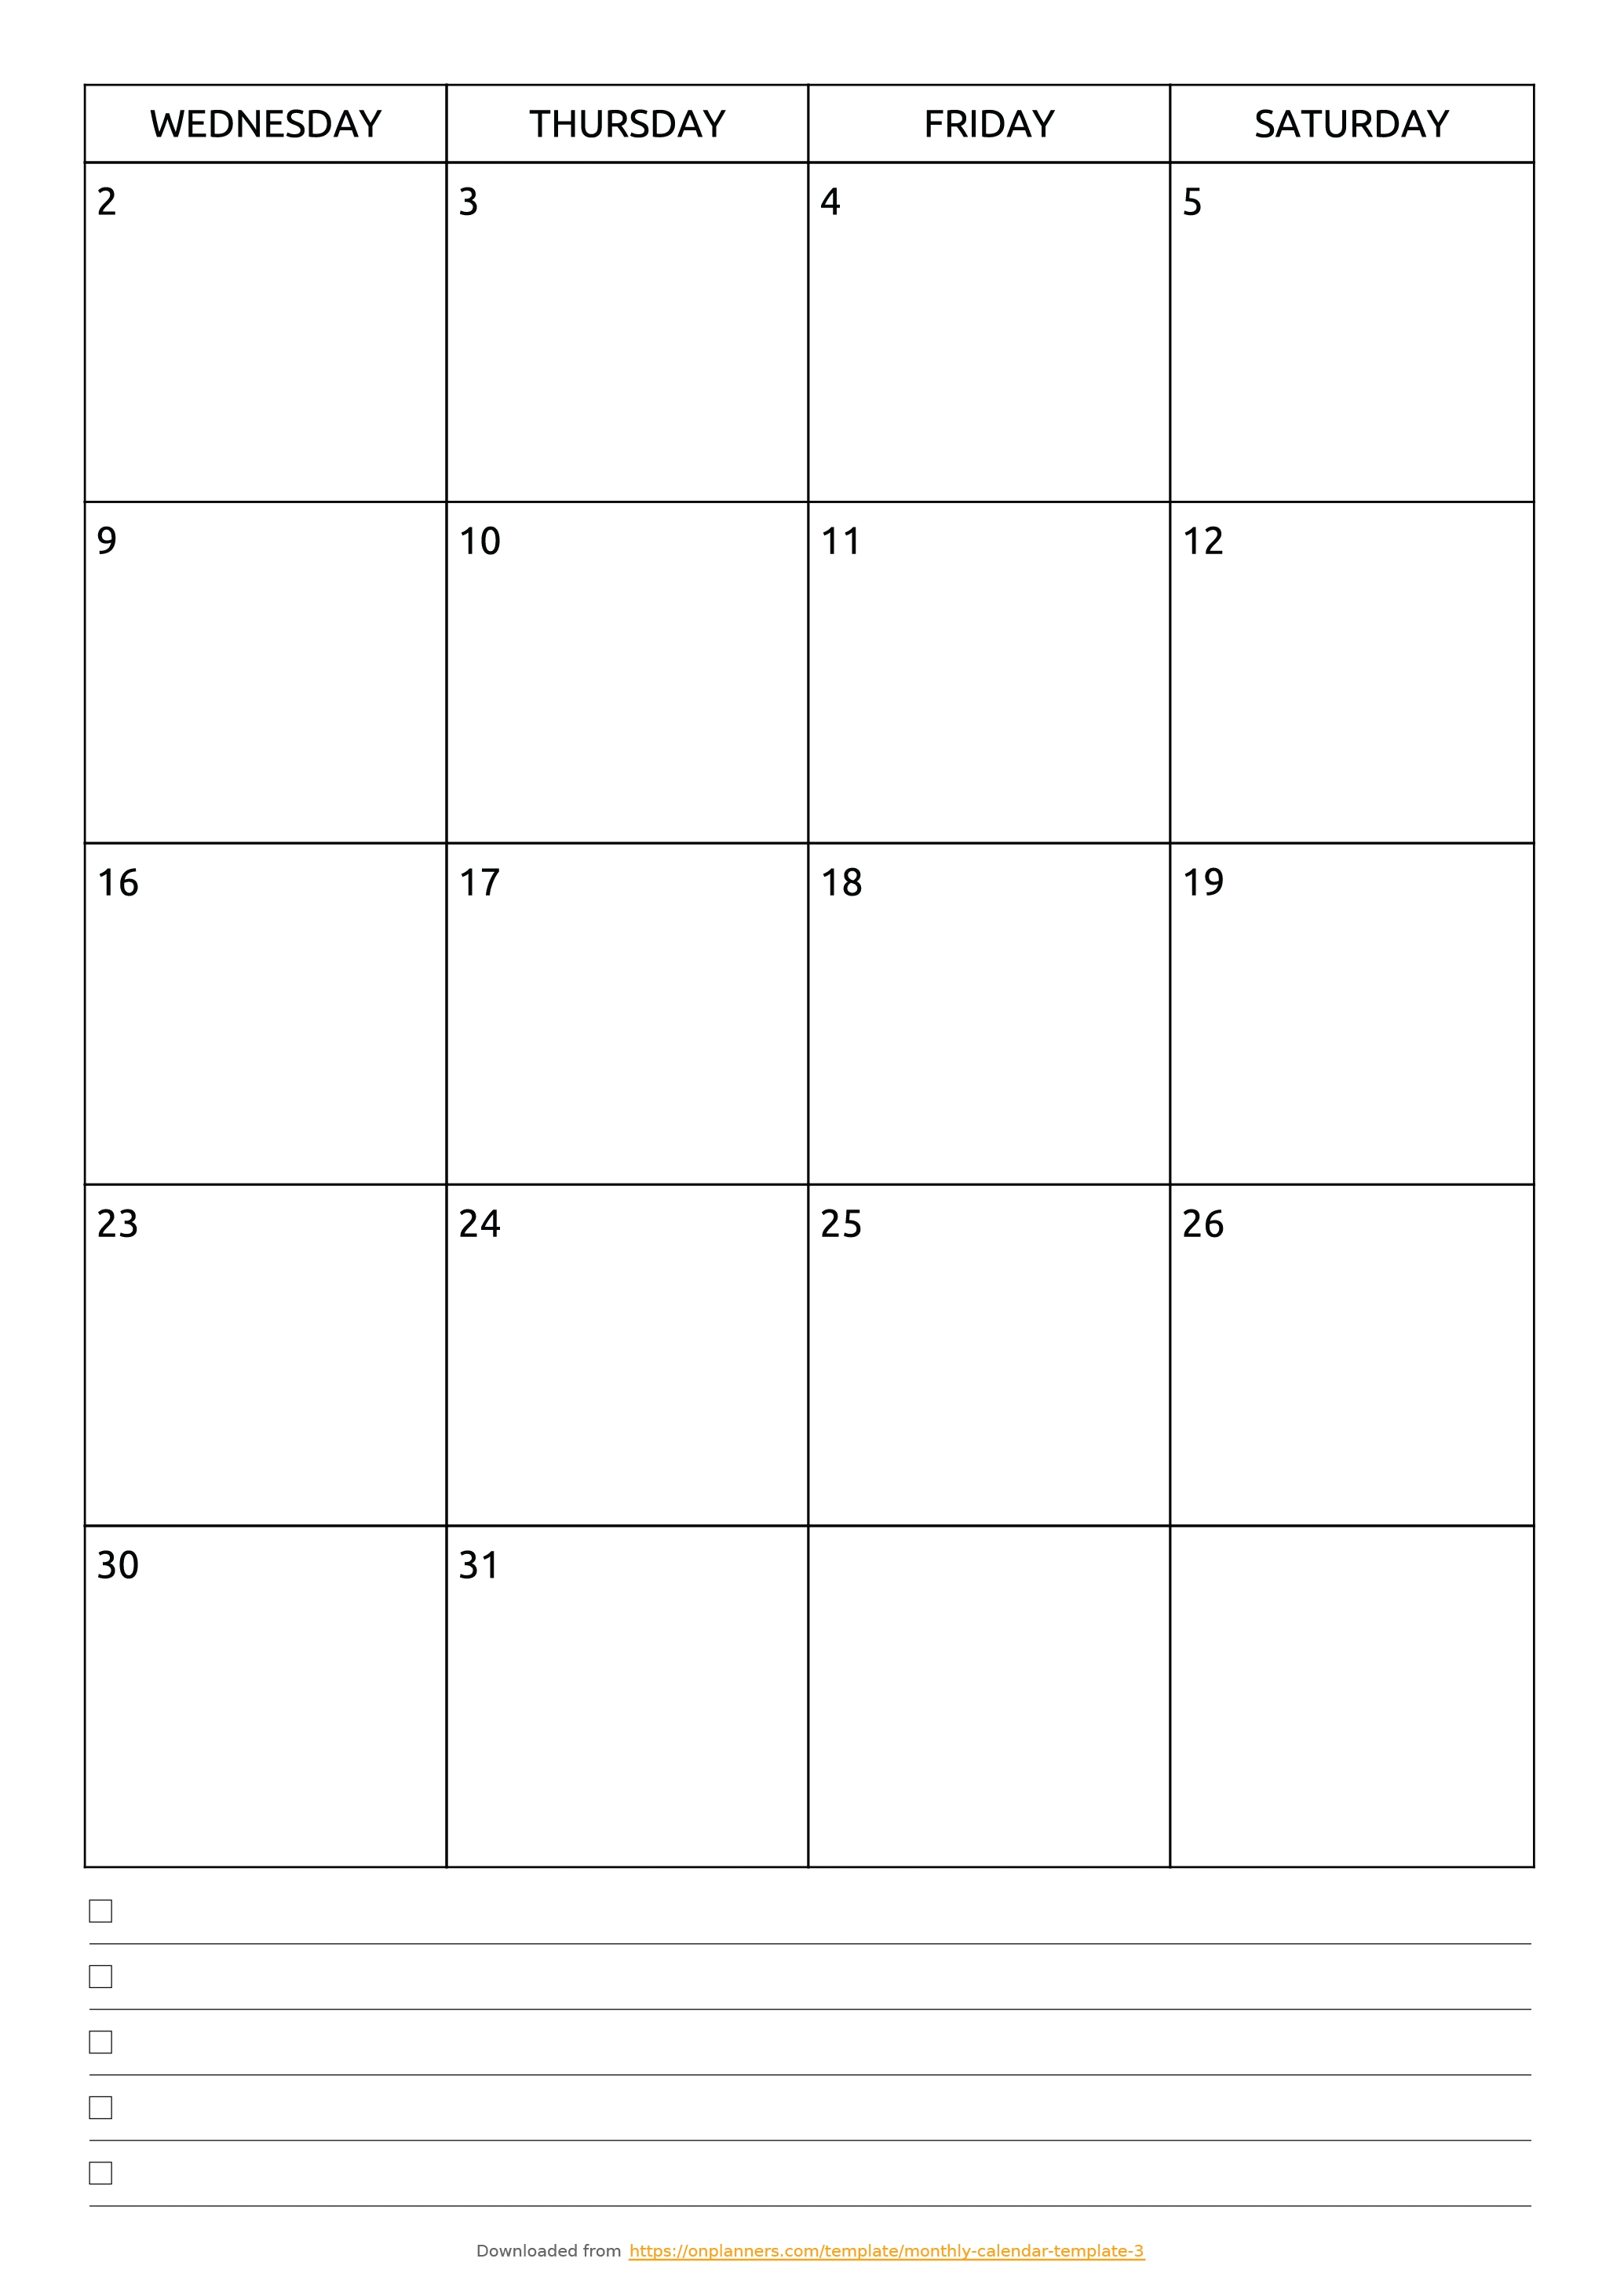 Free Printable Monthly Calendar With Notes Pdf Download inside Free Printable Weekly Calendar Page With Notes Sections